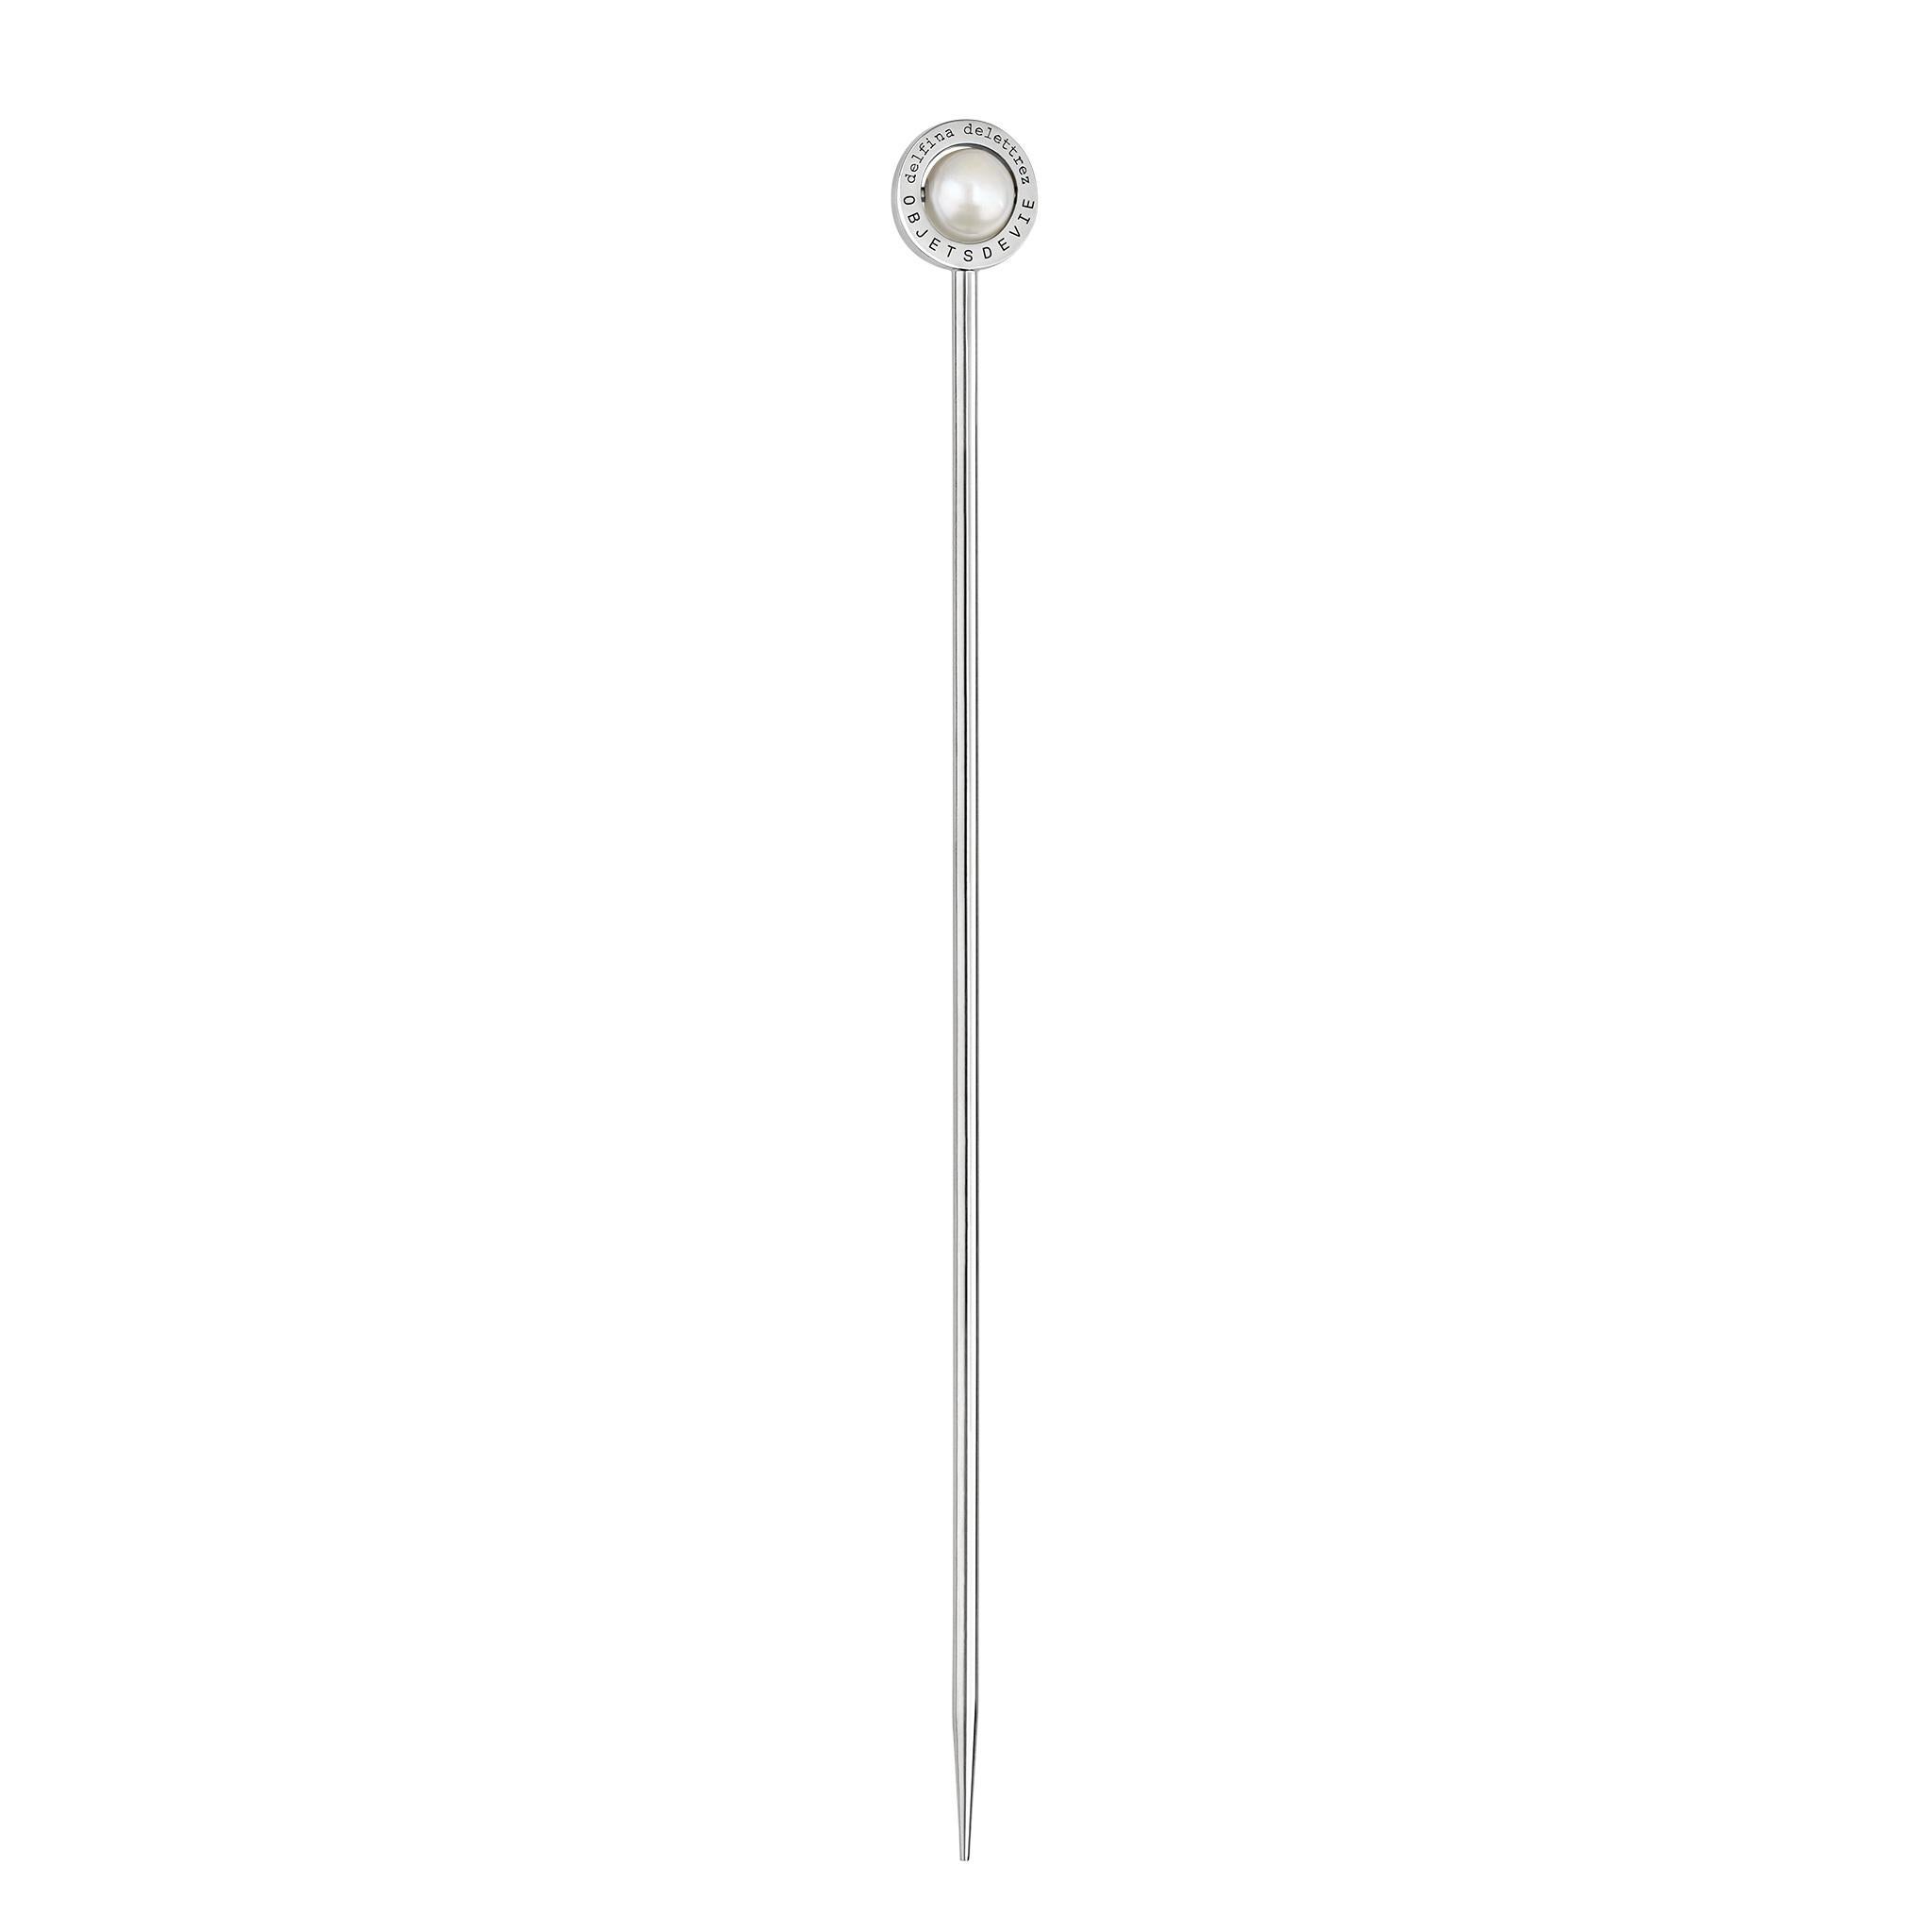 Stecco 925 cocktail stick is an 11.5cm sterling silver needle topped with a flat silver ring framing either a spinning pearl, green agate or blue or pink chalcedony sphere. Designed to skewer 1, 2 or 3 olives or other cocktail garnishes